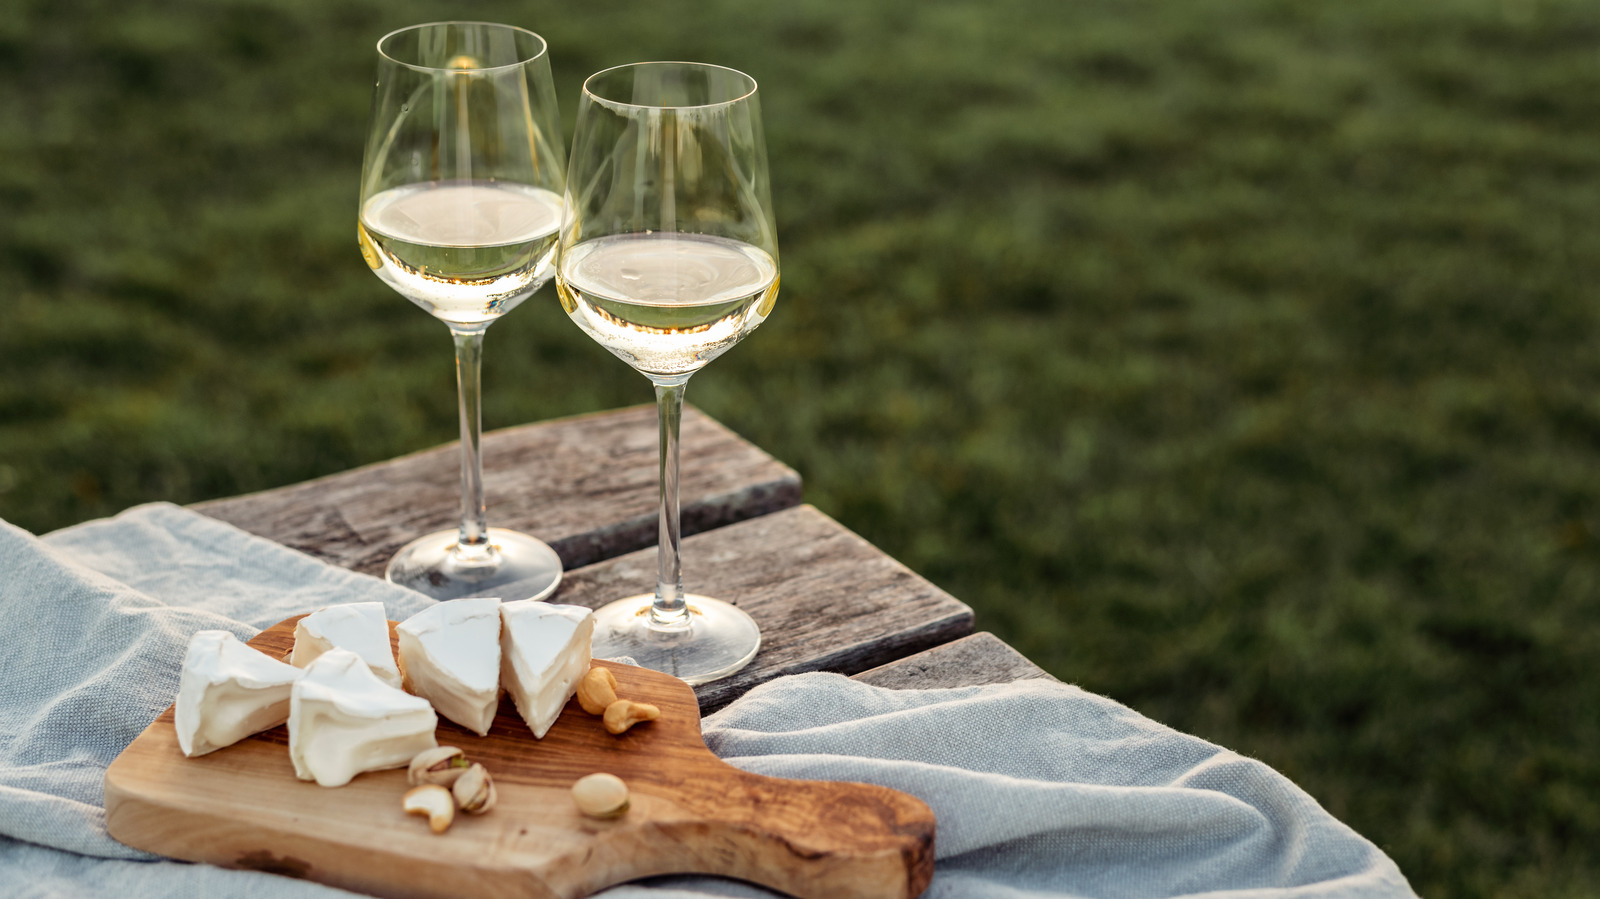 What Is Dry White Wine? - Meaning, Types & More